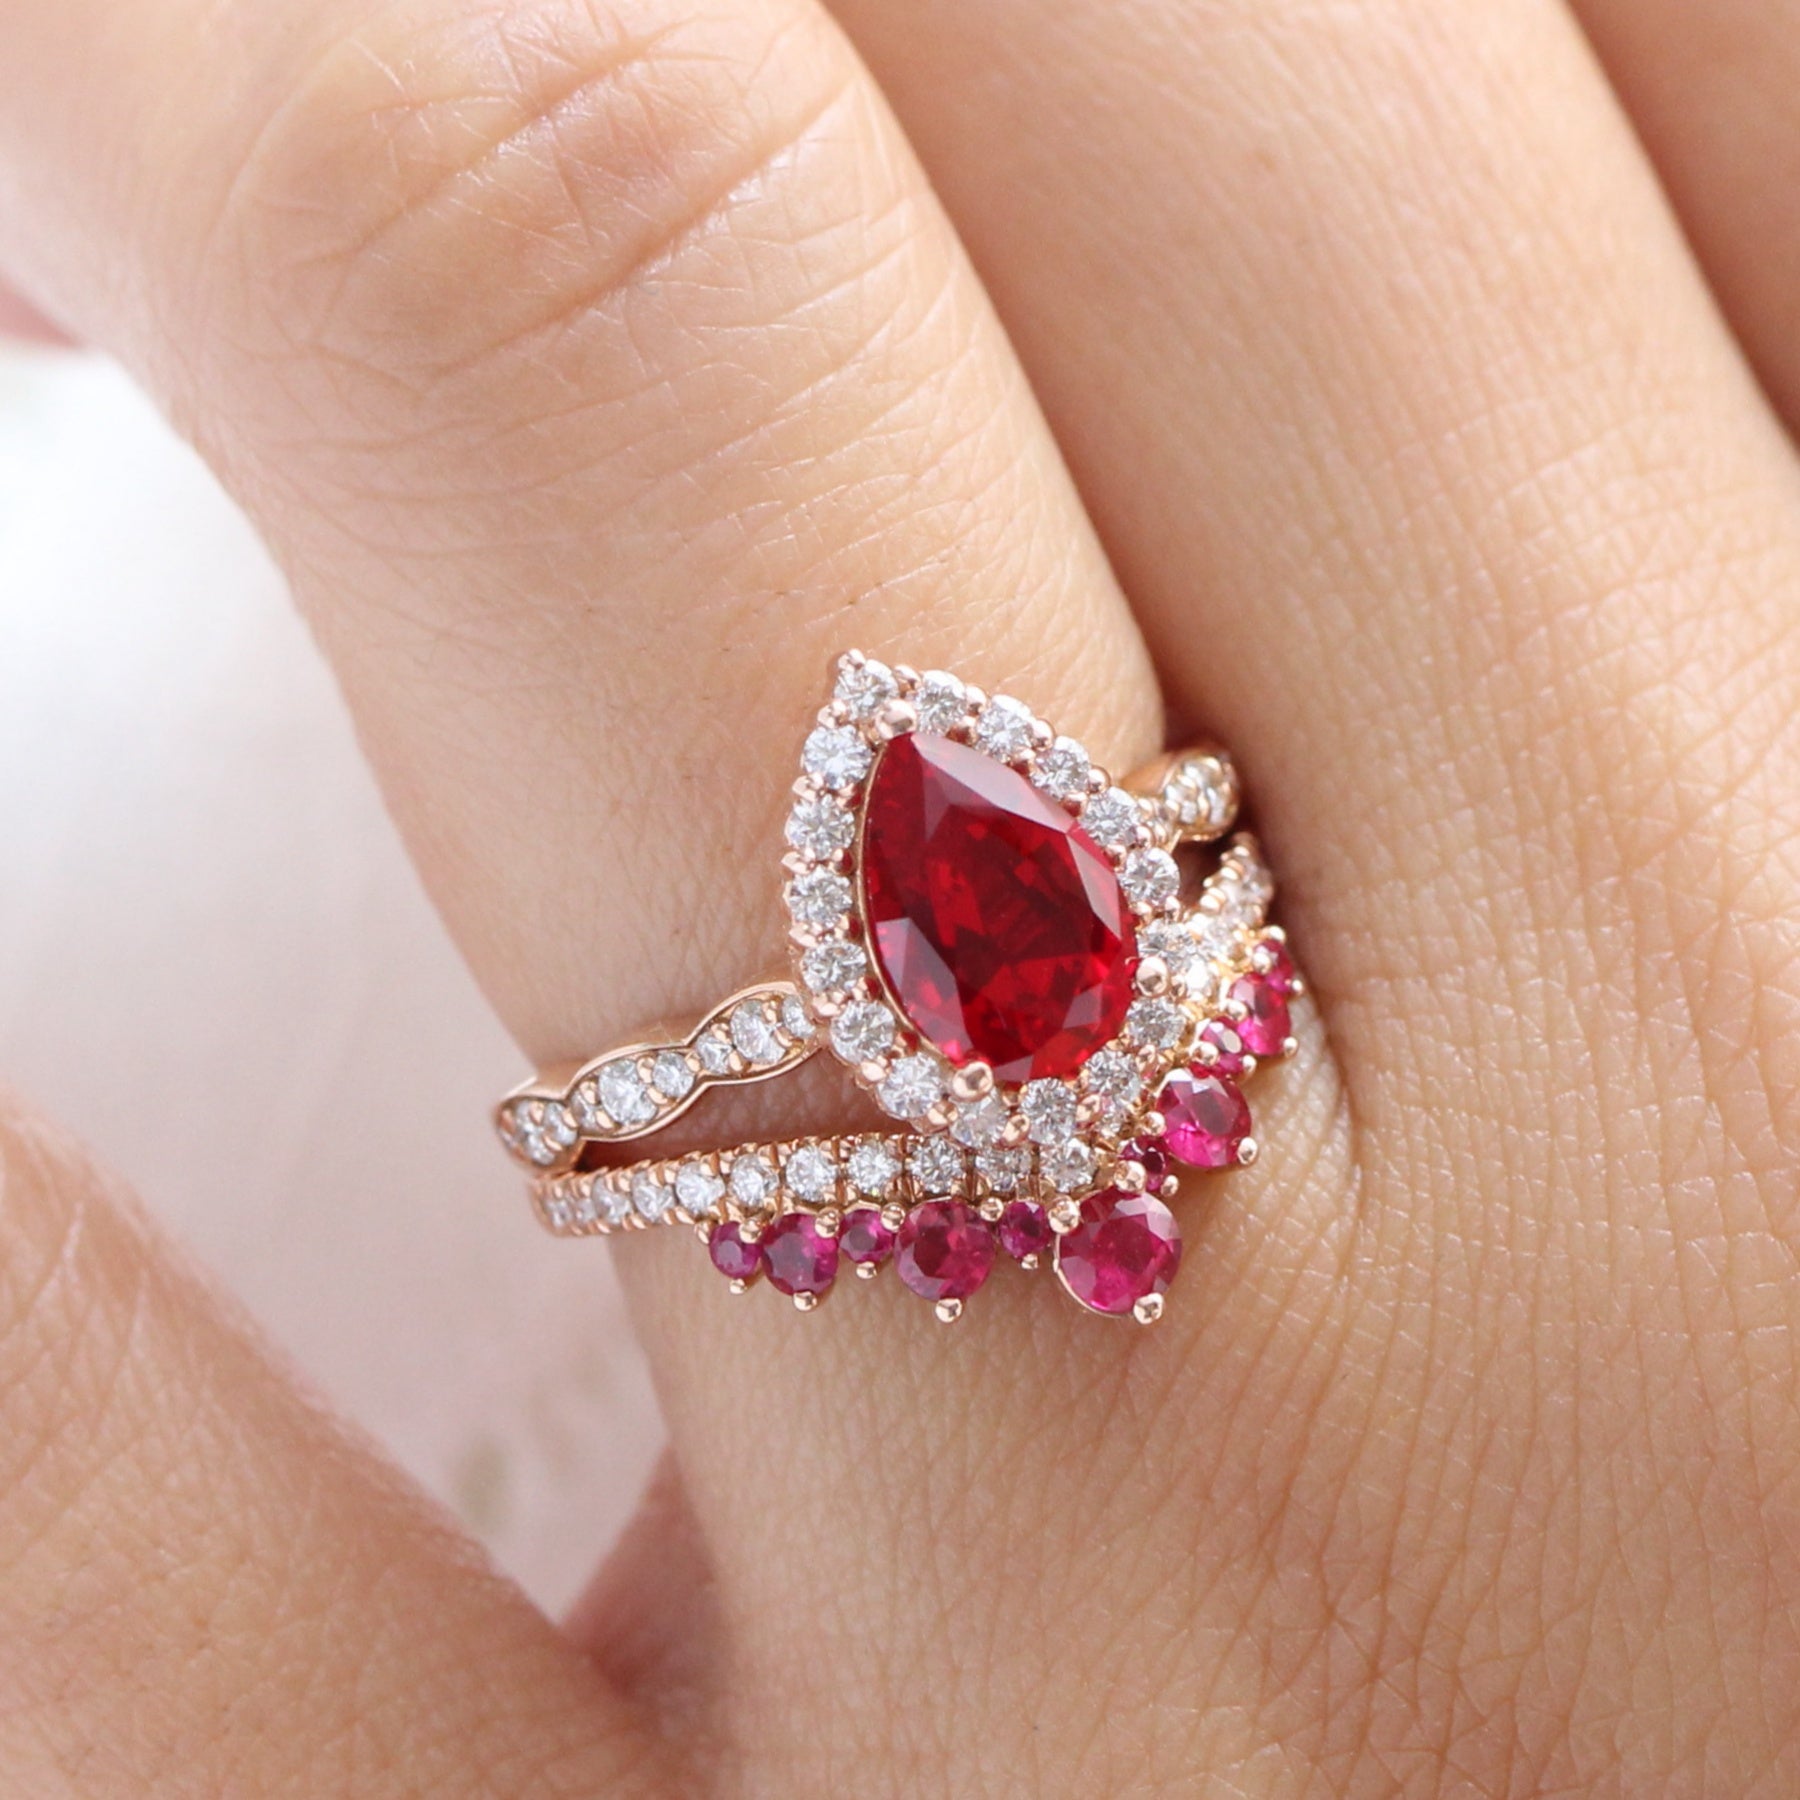 Romantic Pink Crystal Love Heart Engagement Ring Wedding Rings